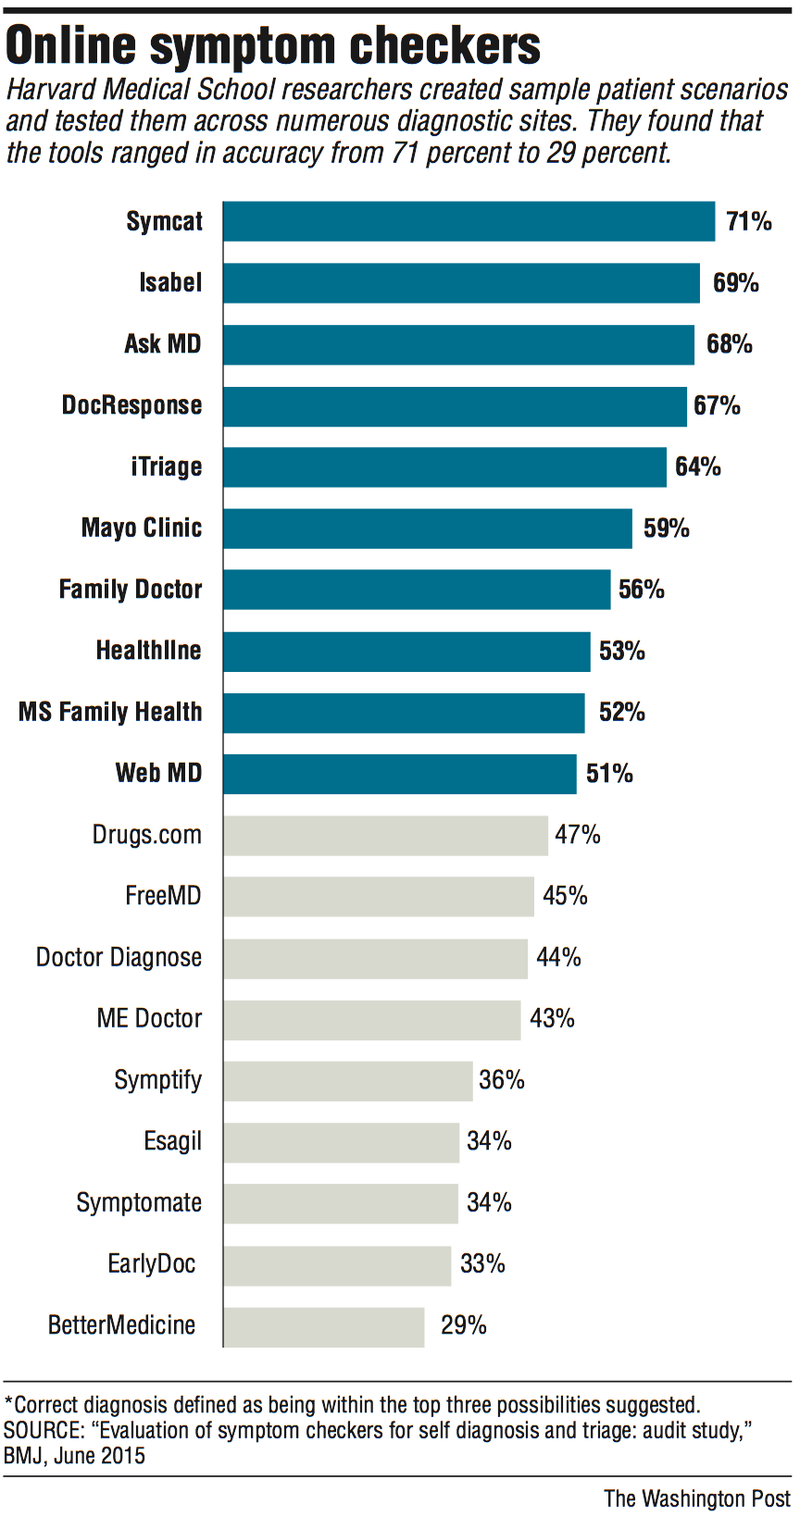 A graphic shows the accuracy of online symptom checkers.